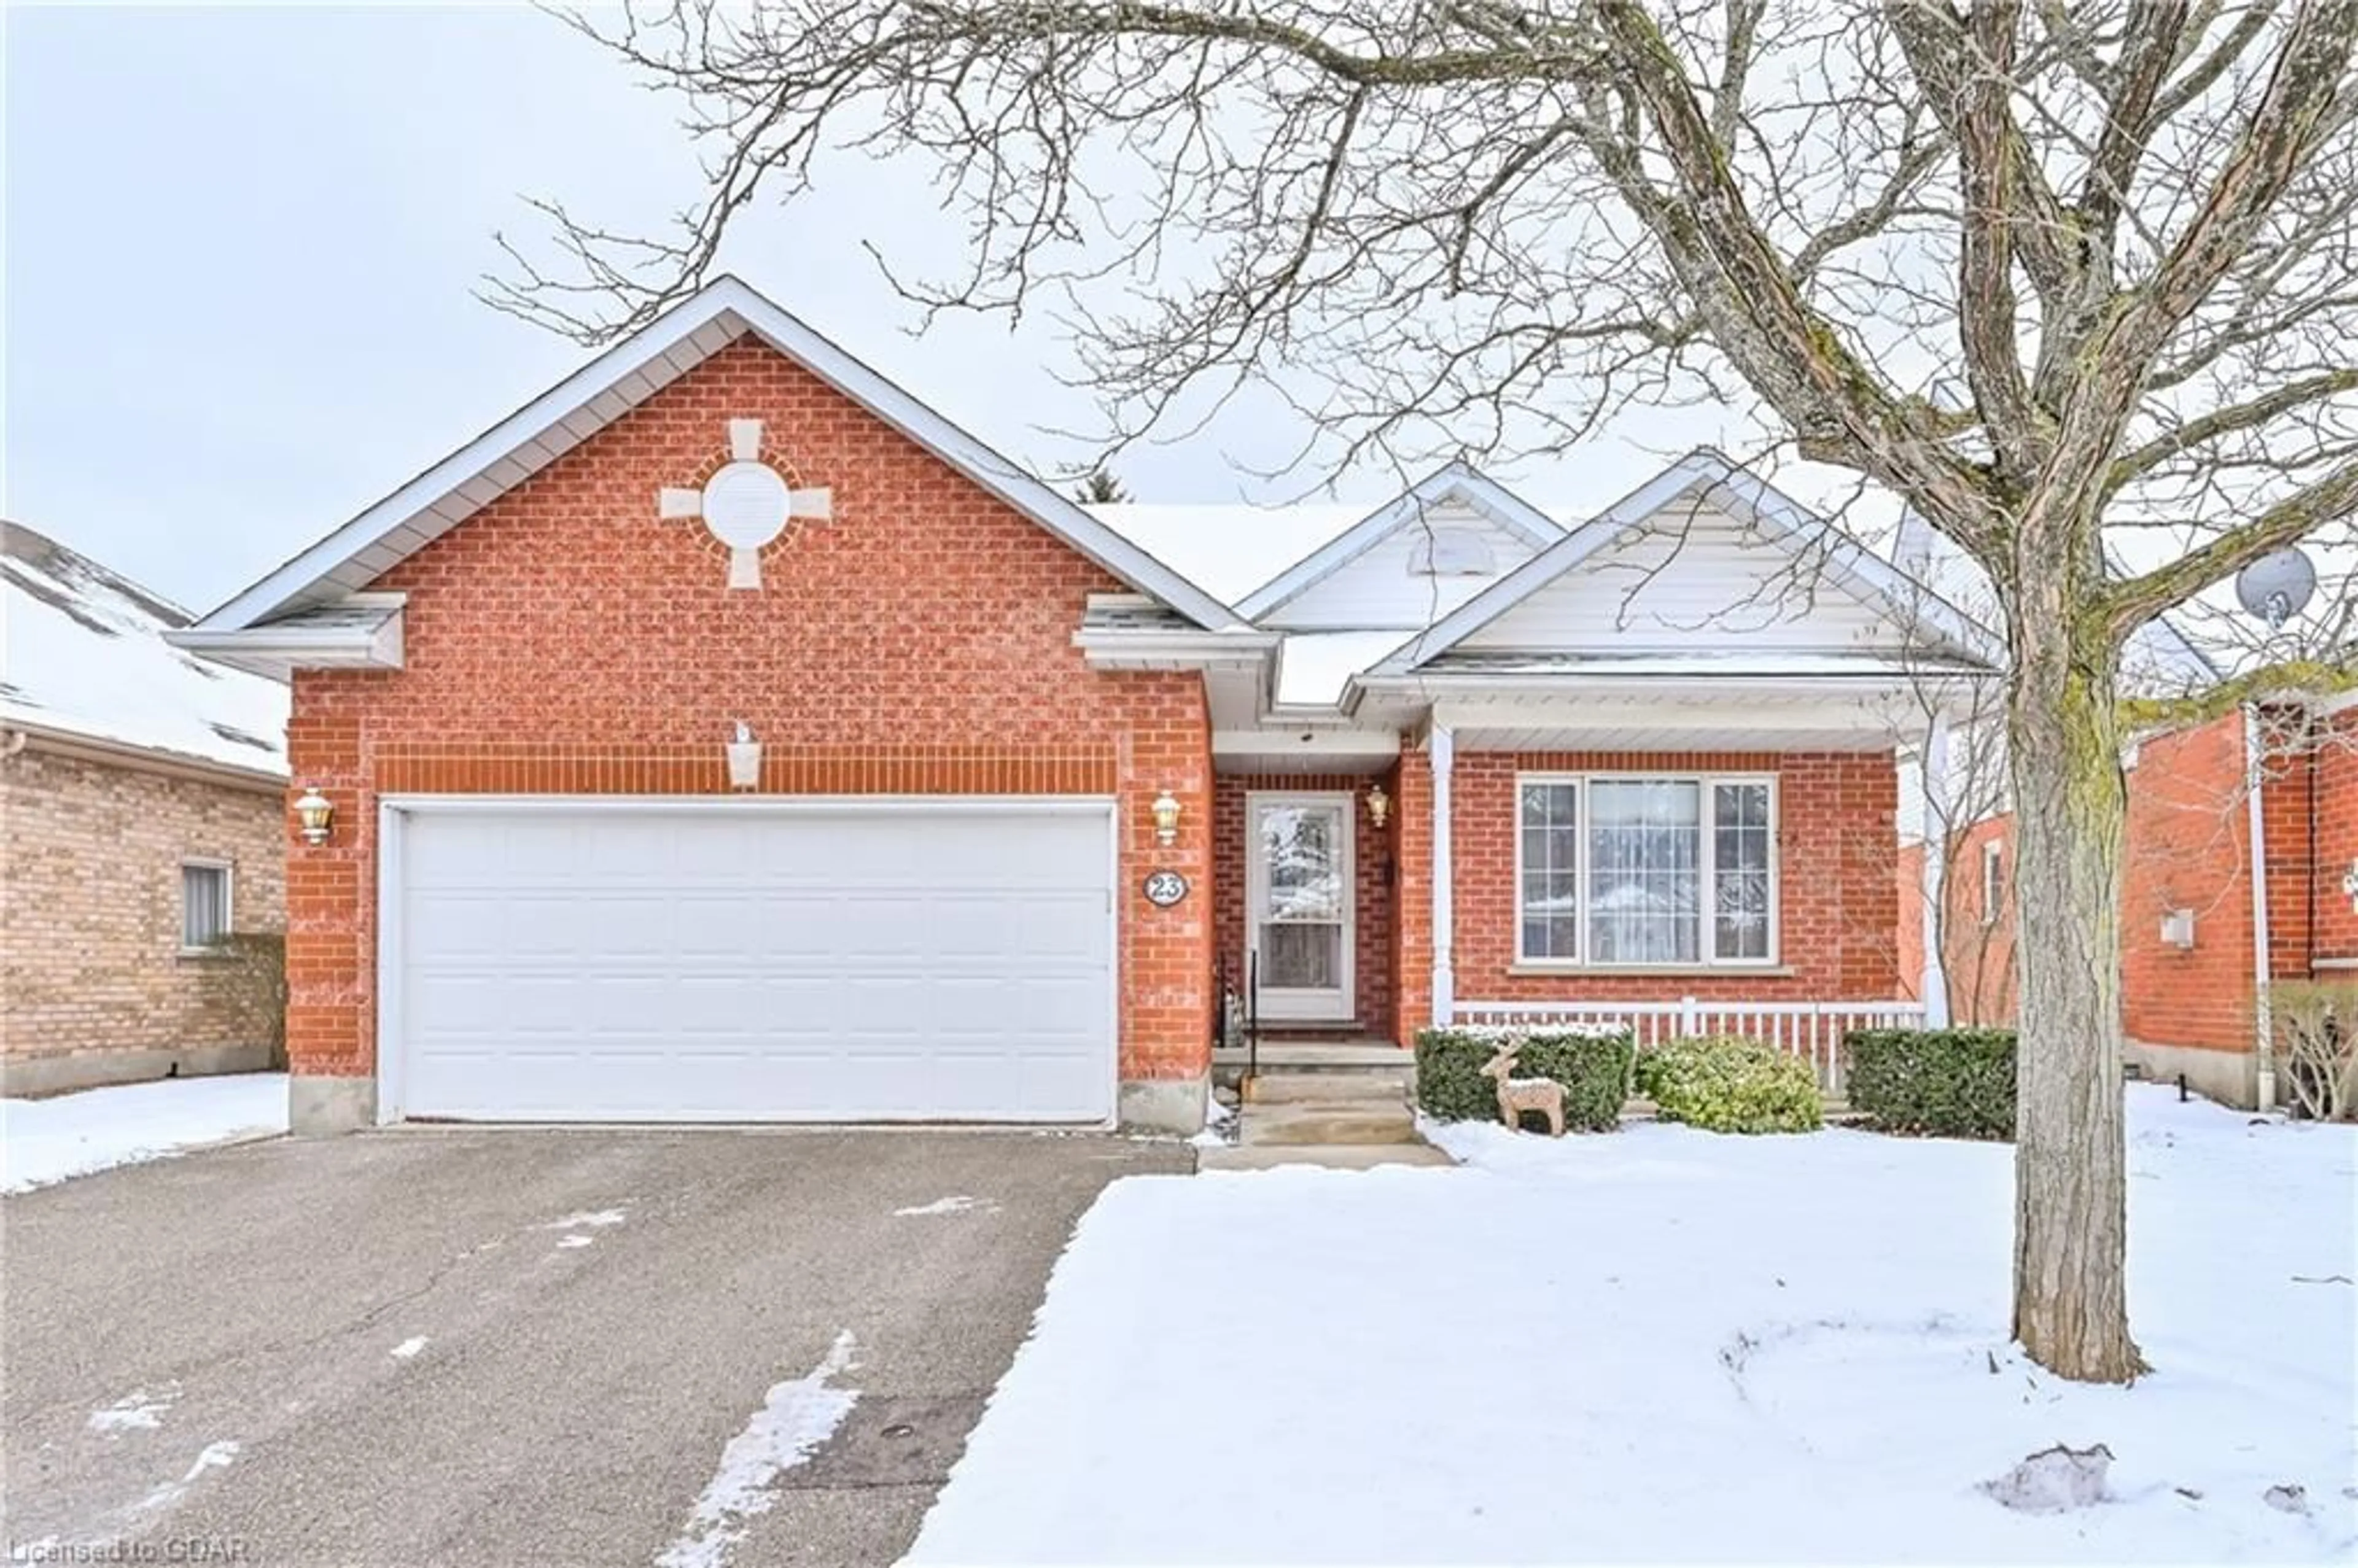 Home with brick exterior material for 23 Cherry Blossom Cir, Guelph Ontario N1G 4X7